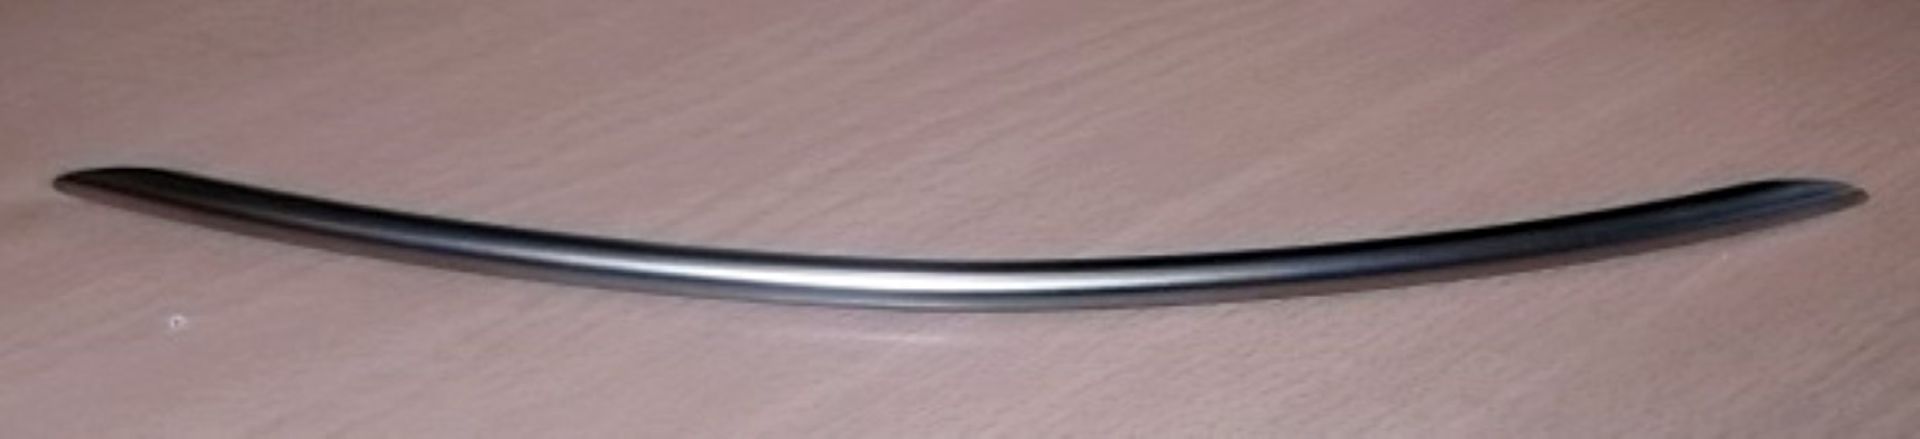 100 x BOW Handle Kitchen Door Handles By Crestwood - 320mm - New Stock - Brushed Nickel Finish - - Image 2 of 10